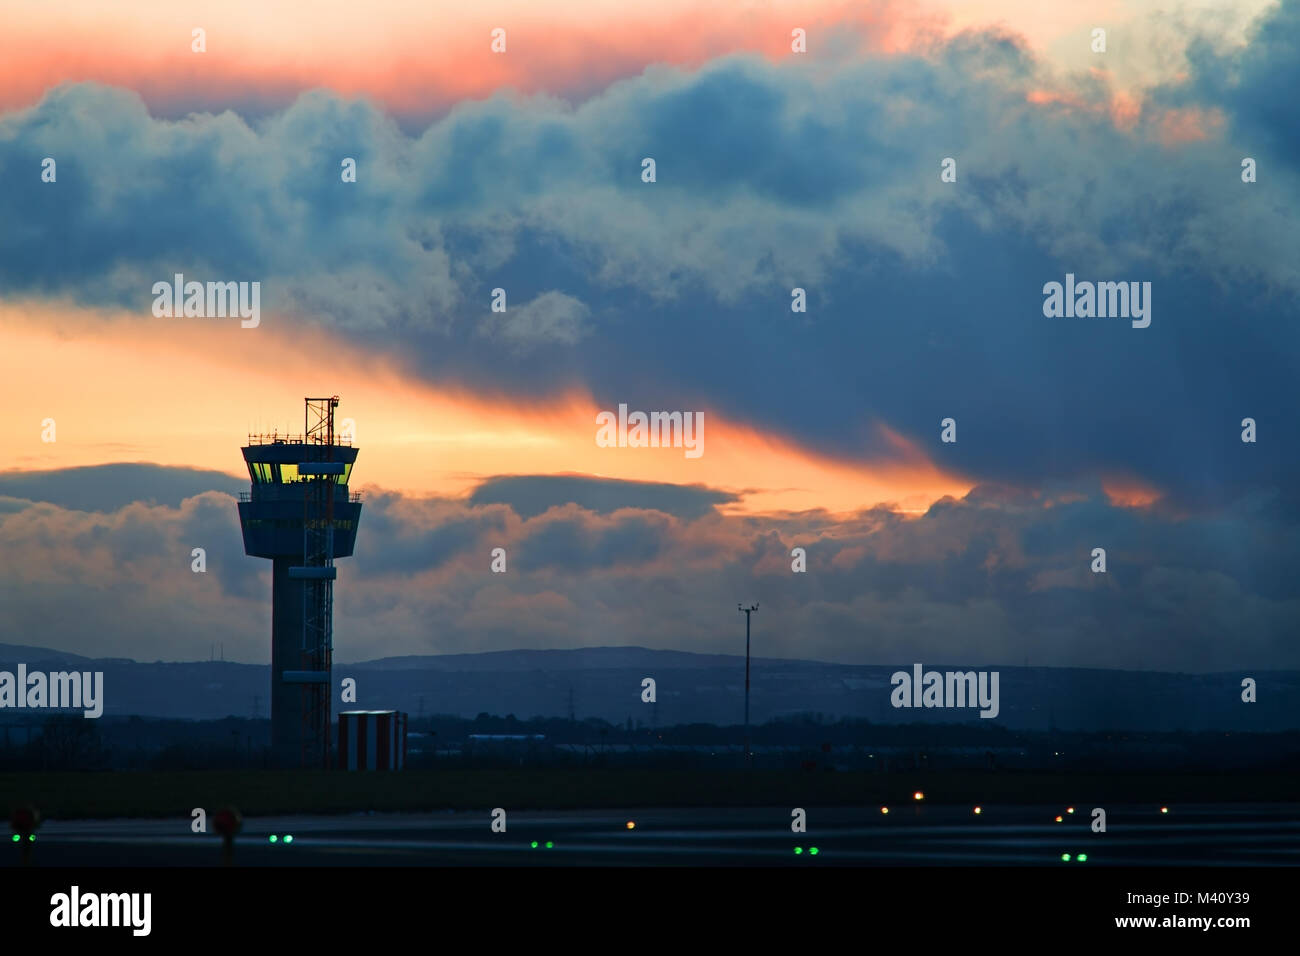 Liverpool John Lennon Airport Air Traffic control tower against a stormy sky at dusk Stock Photo